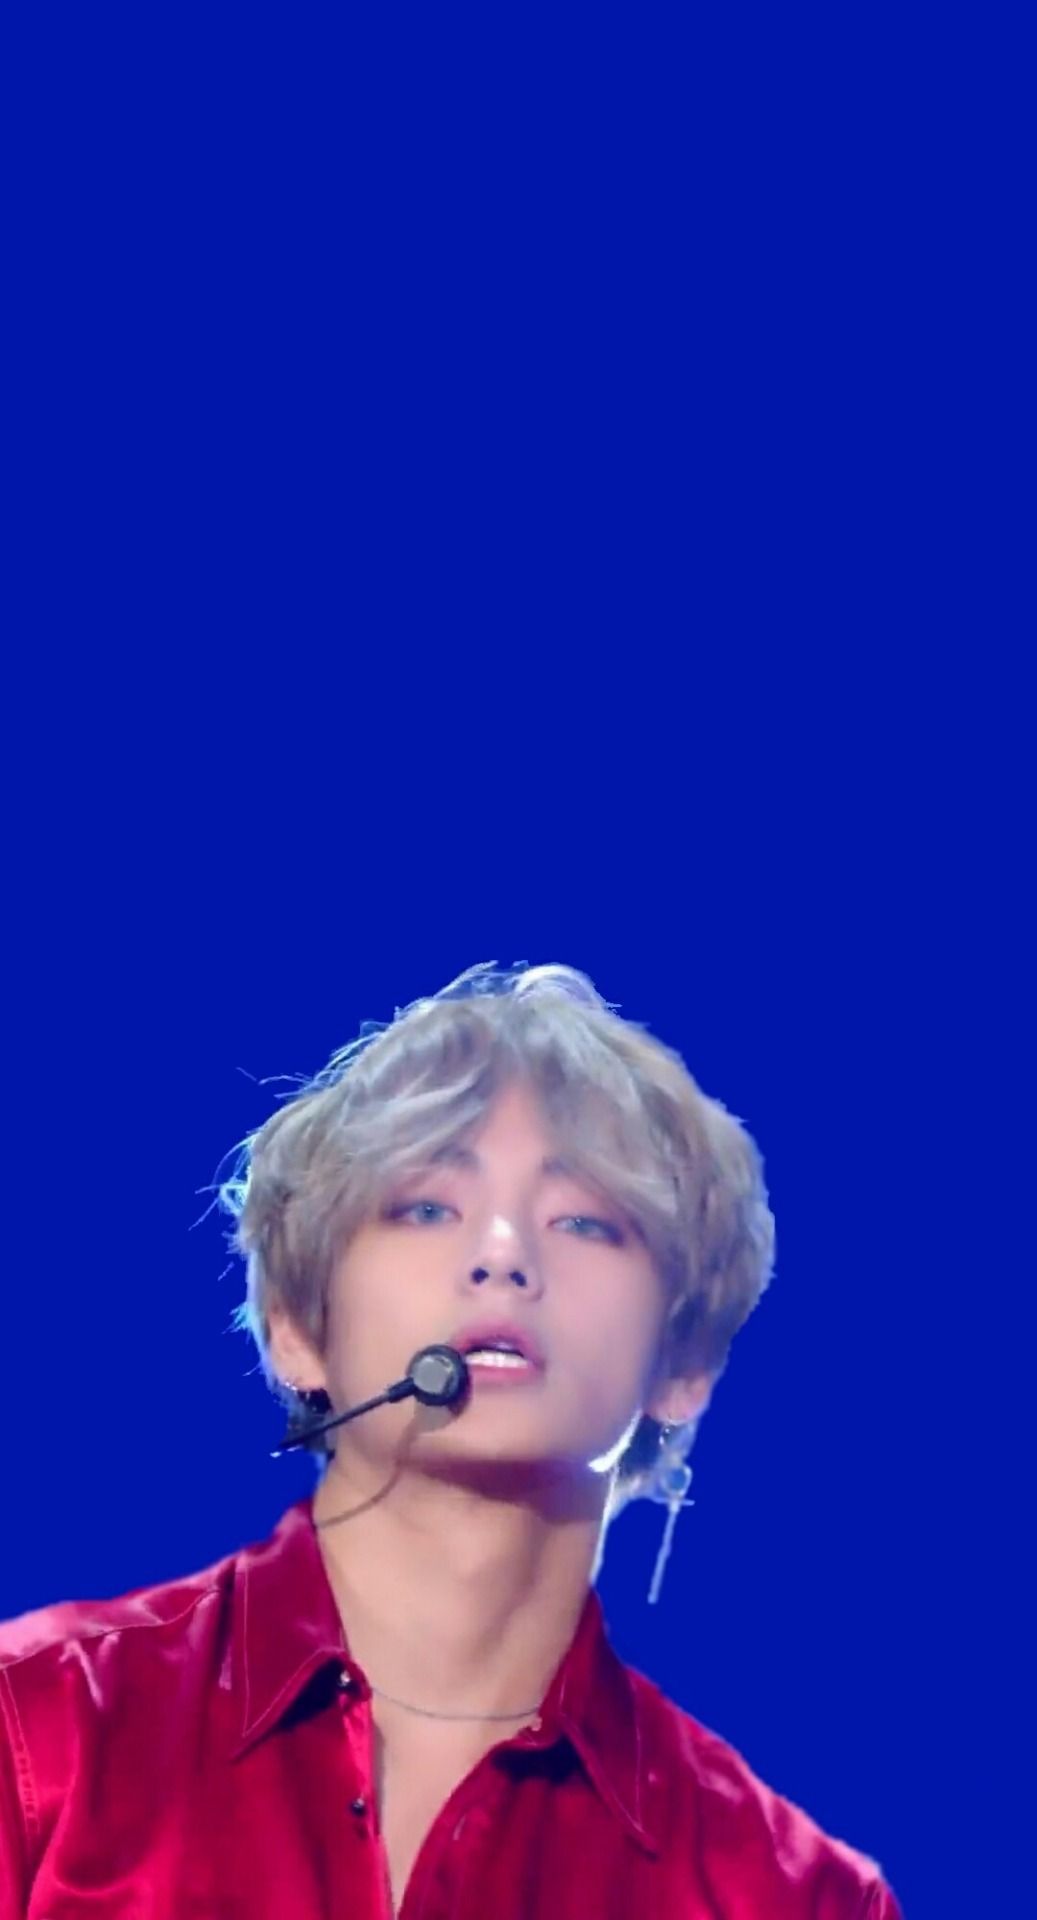 Bts Live Wallpaper For Iphone - Wall